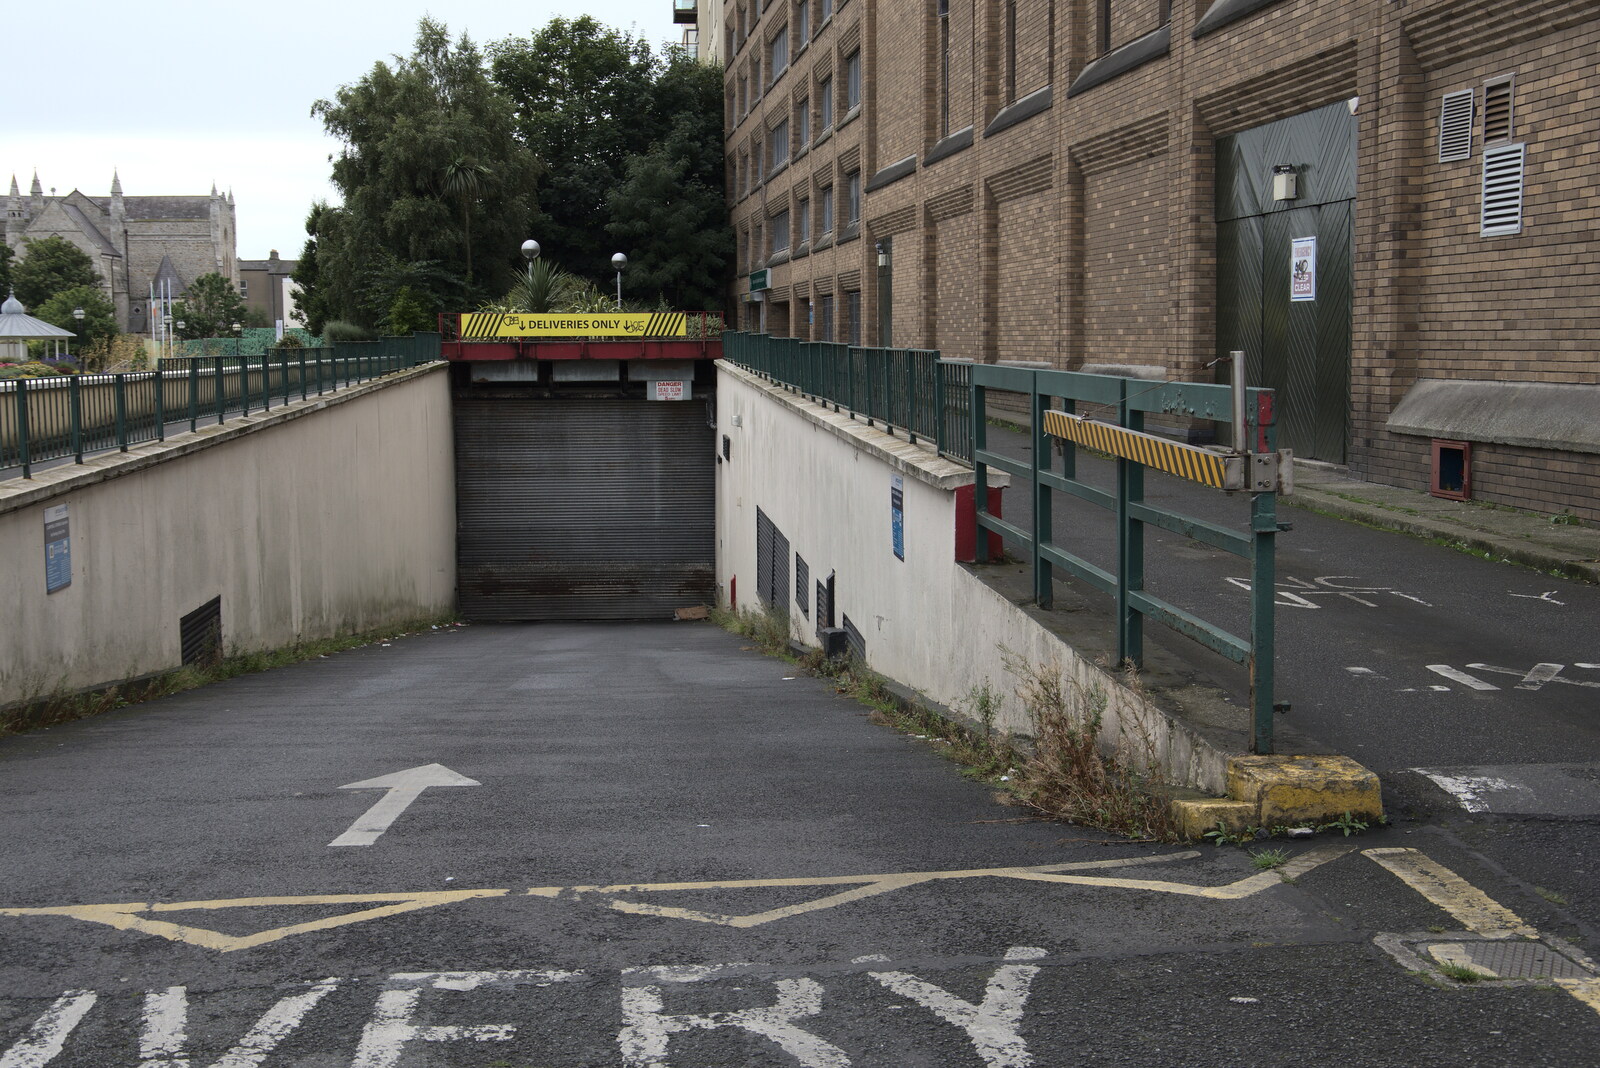 An underground car park entrance from Manorhamilton and the Street Art of Dún Laoghaire, Ireland - 15th August 2021